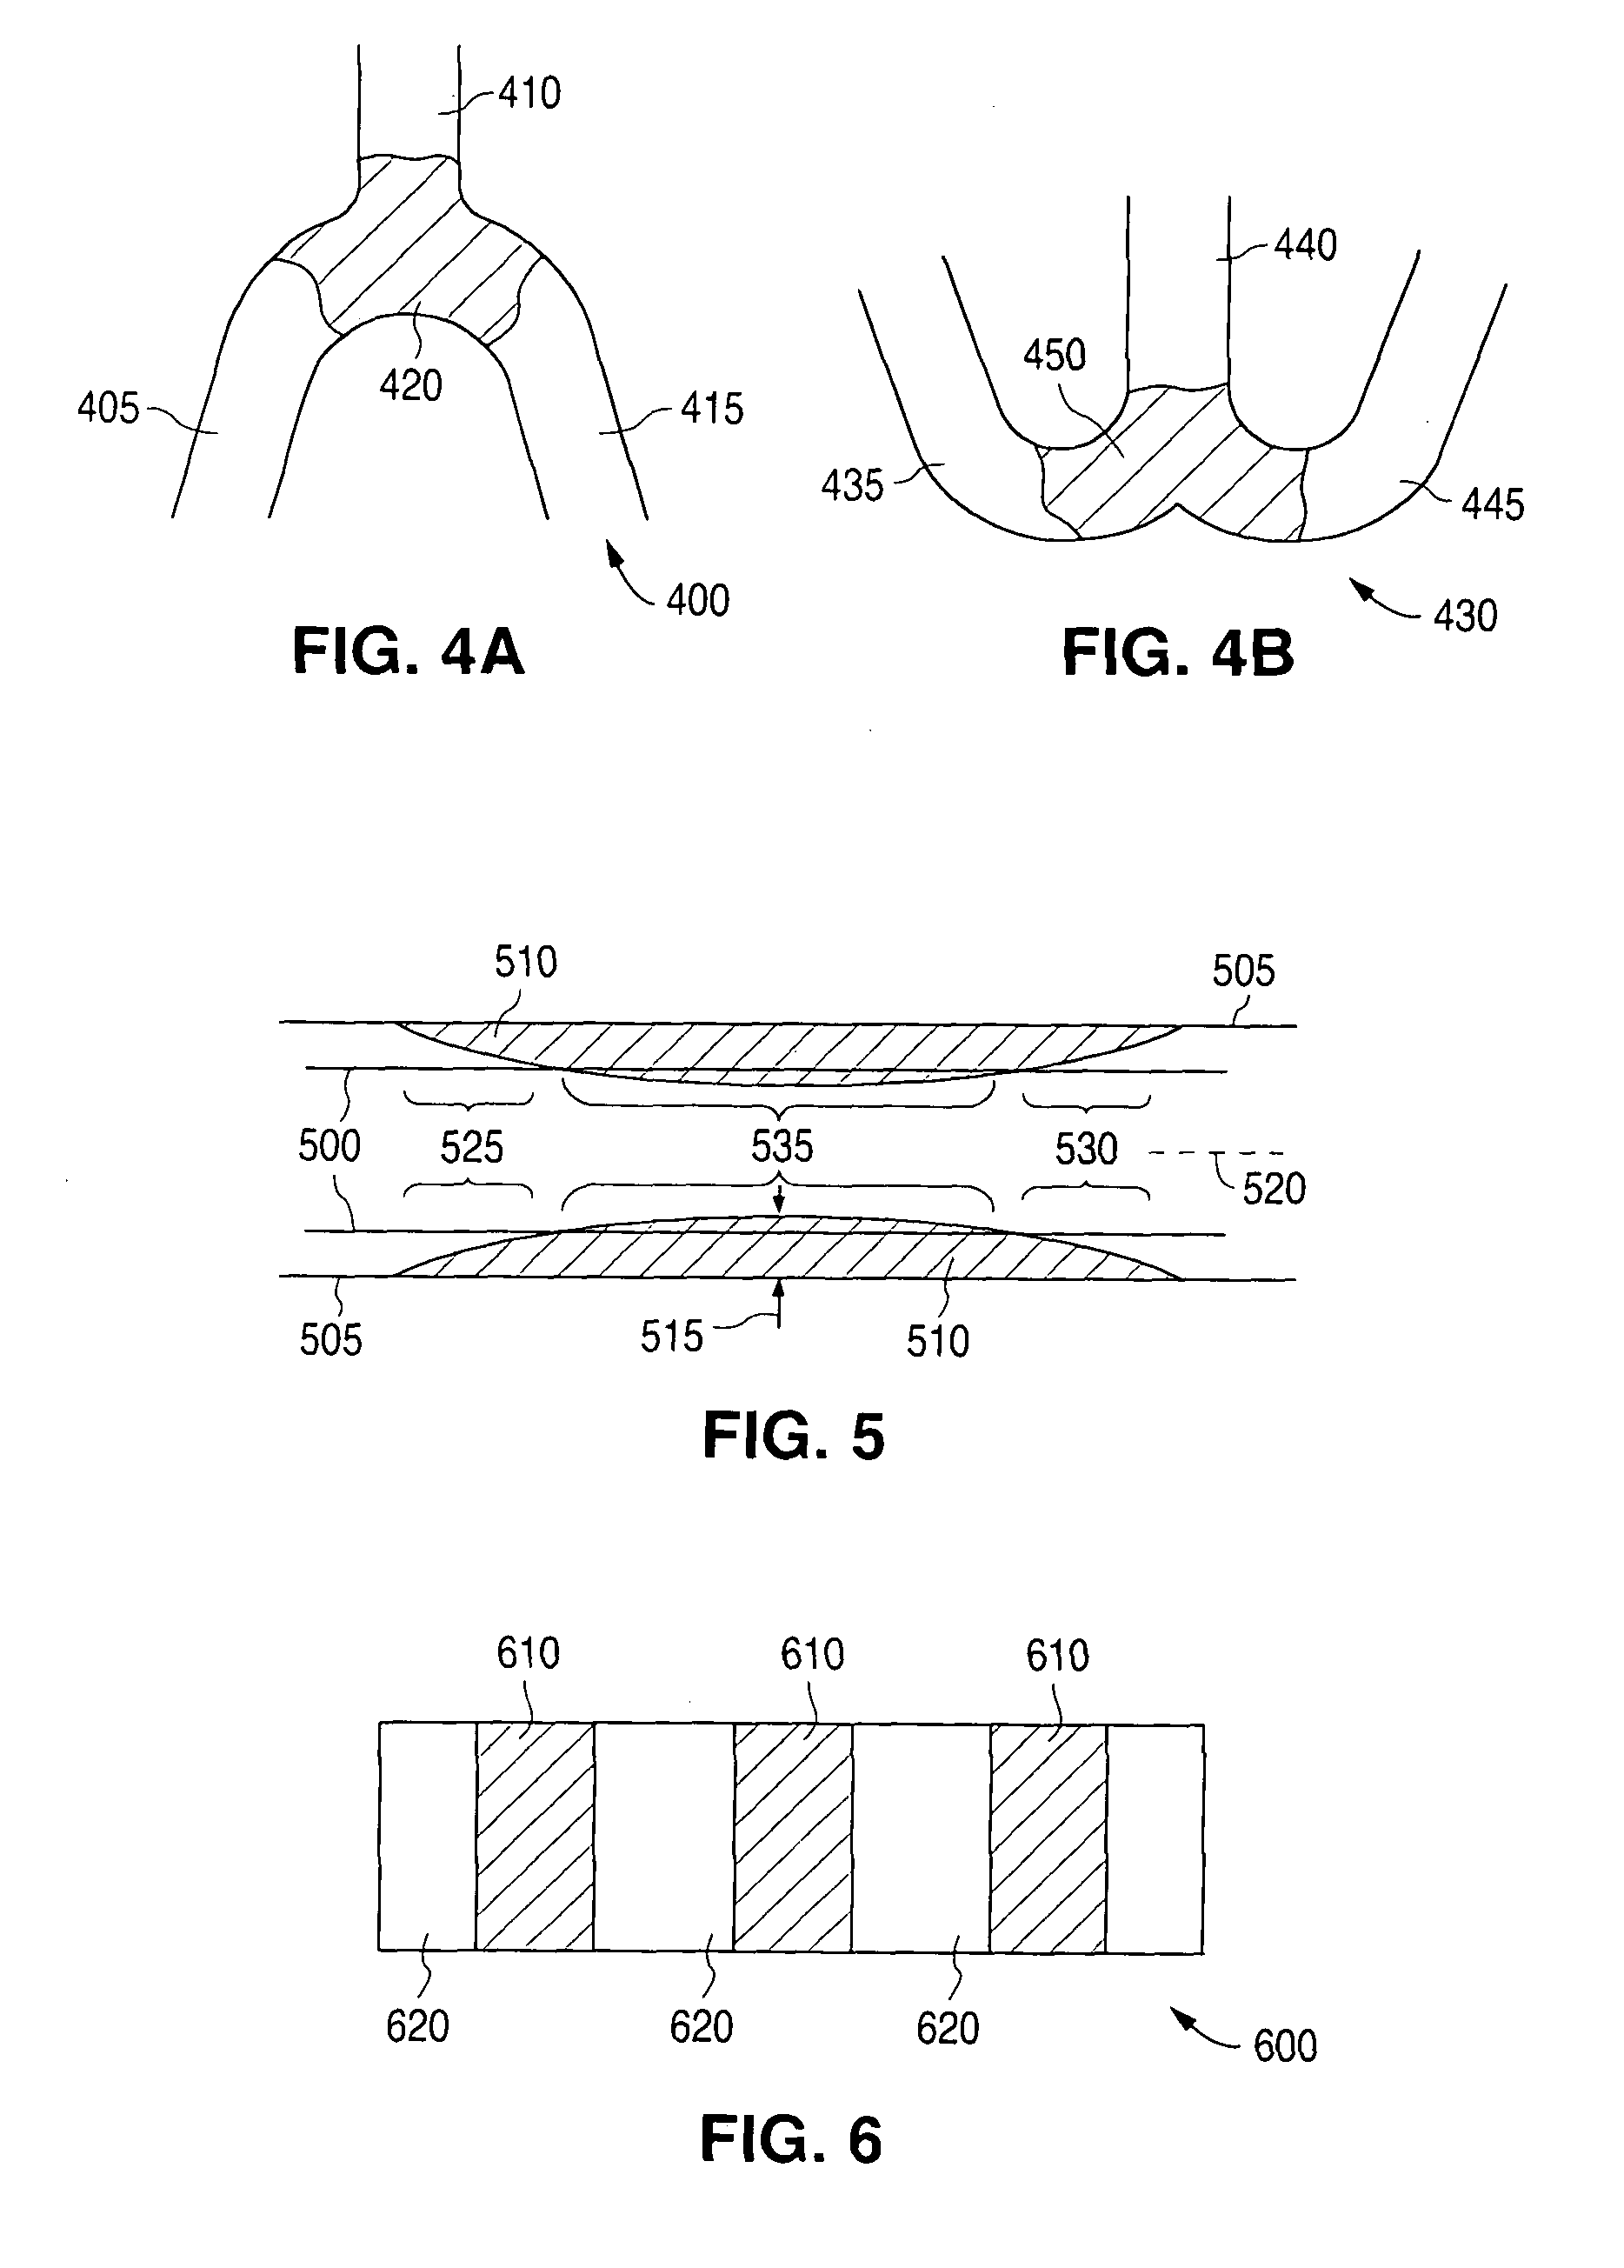 Modification of polymer stents with radiation